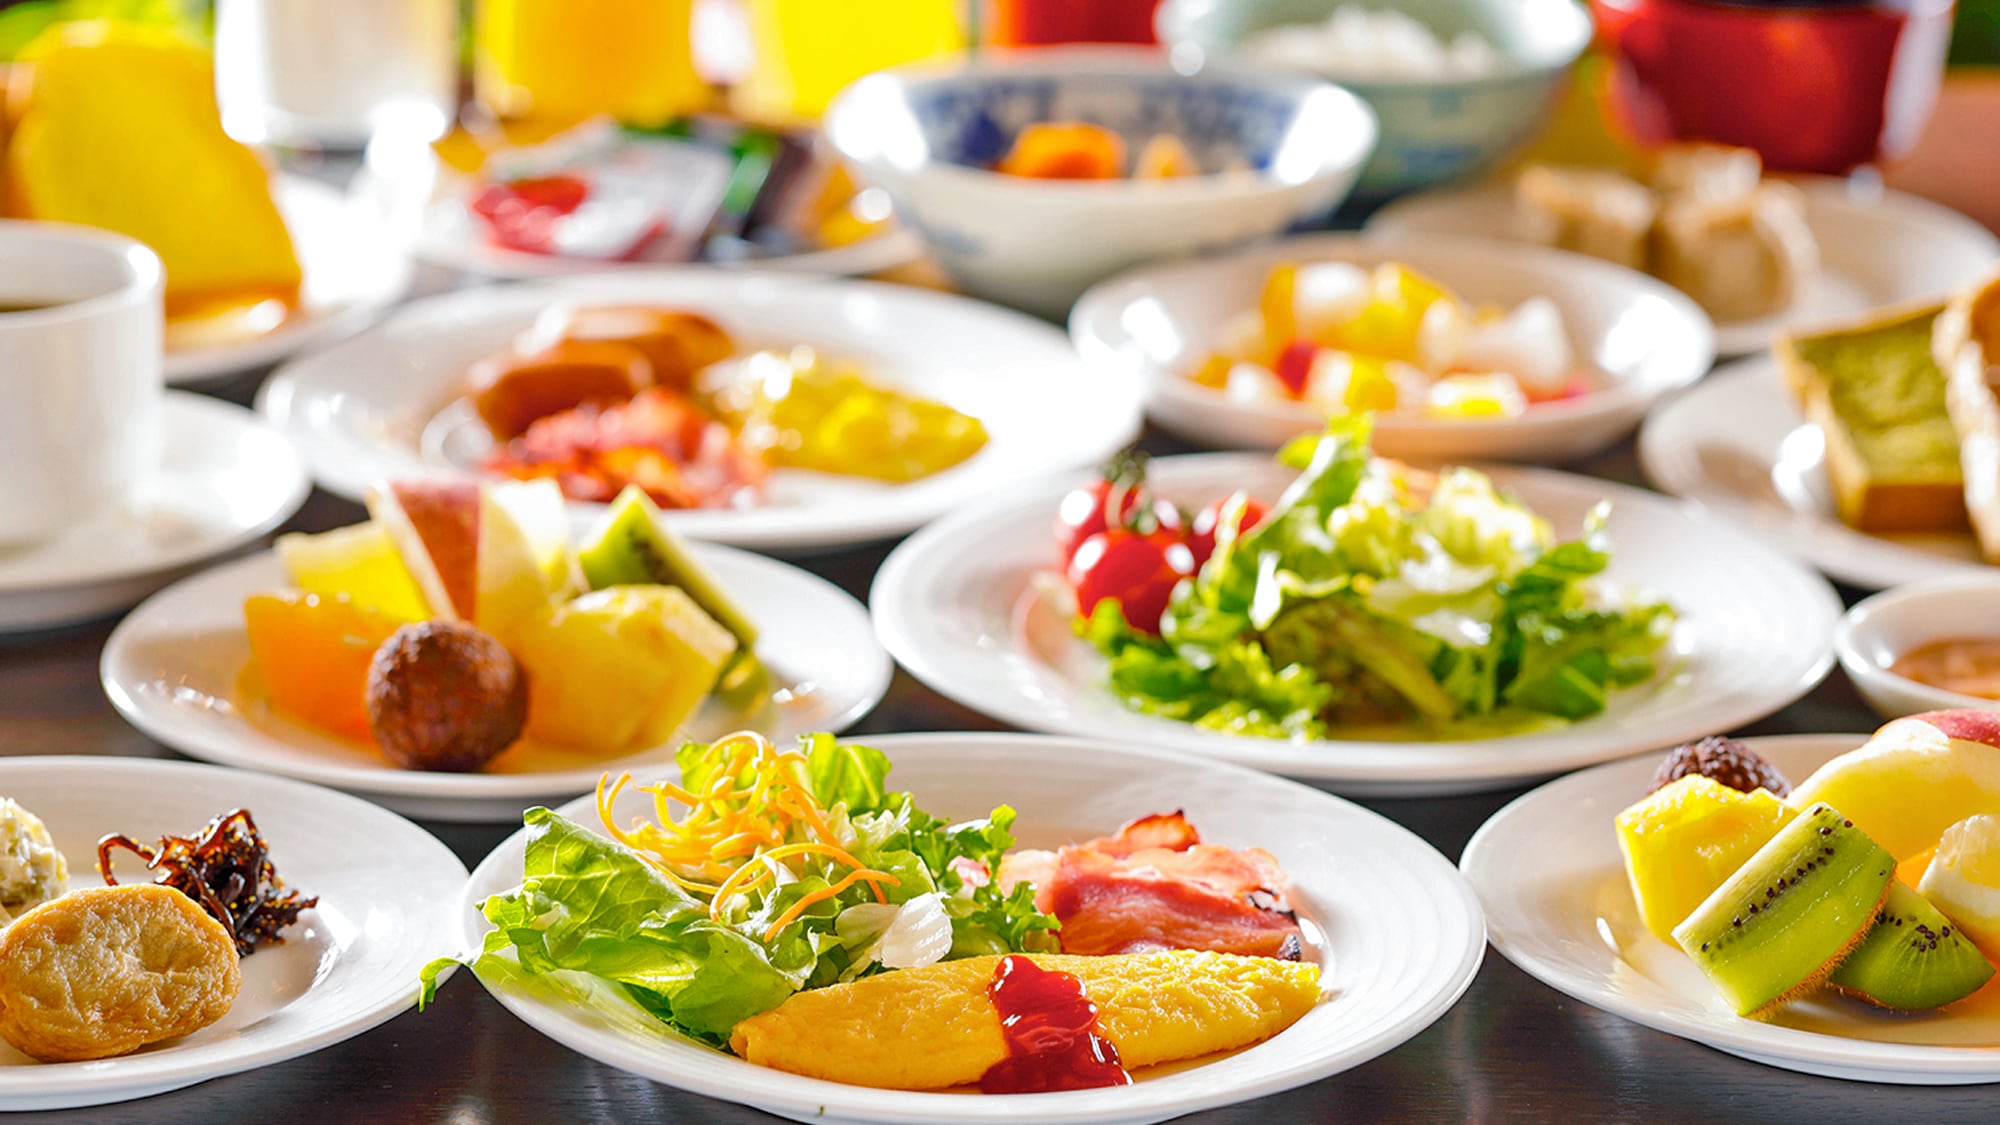 A colorful and eye-catching breakfast buffet.